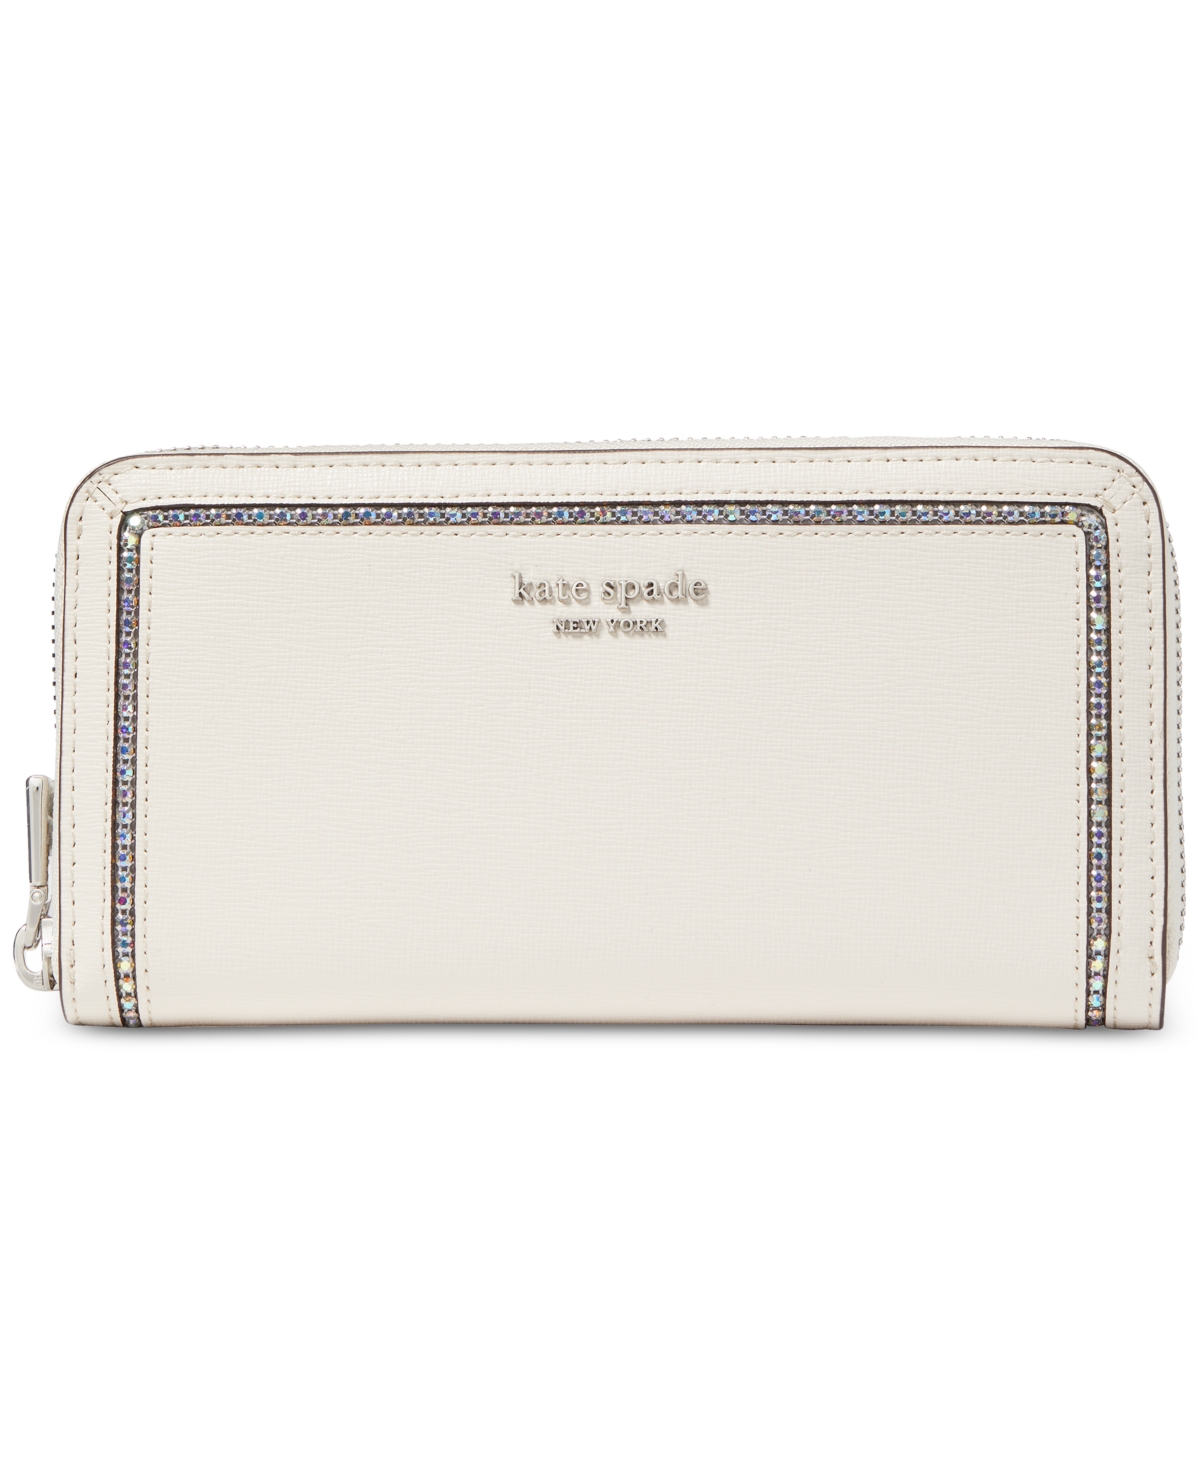 Kate Spade New York Morgan Crystal Inlay Saffiano Leather Zip Around Continental Wallet In Parchment.